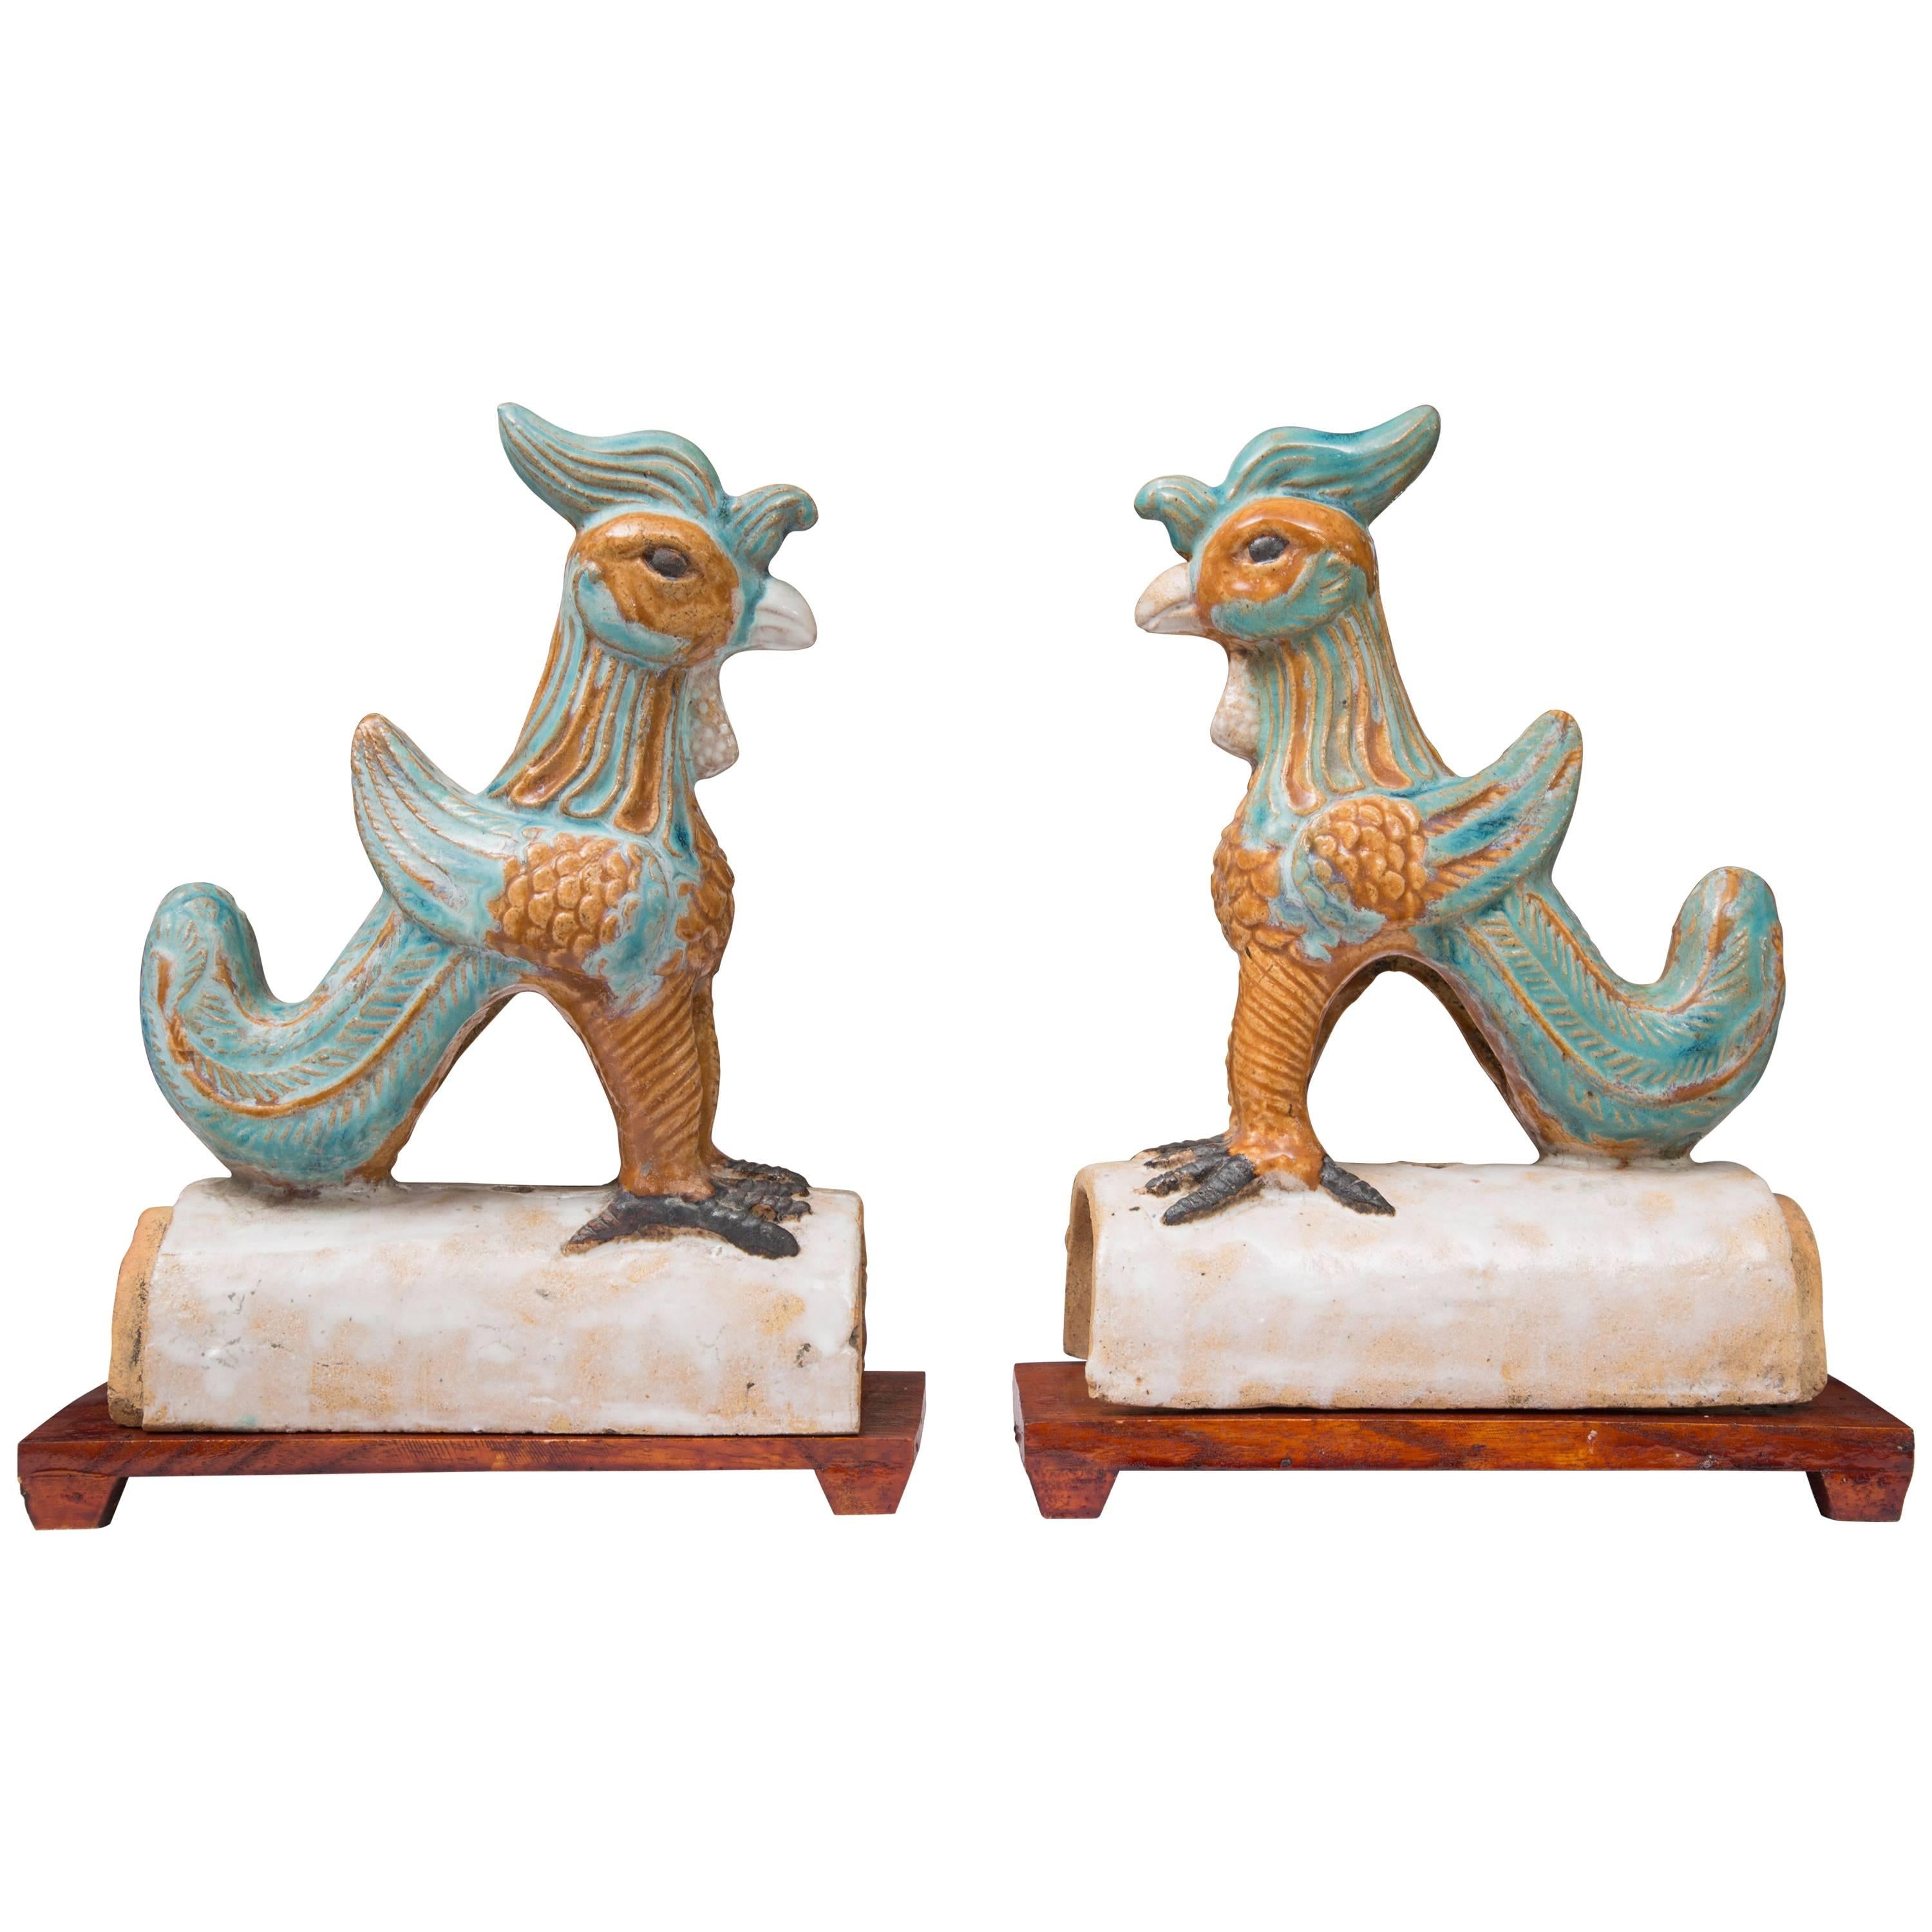 Pair of Chinese Glazed Terracotta Roof Tiles on Wood Stands